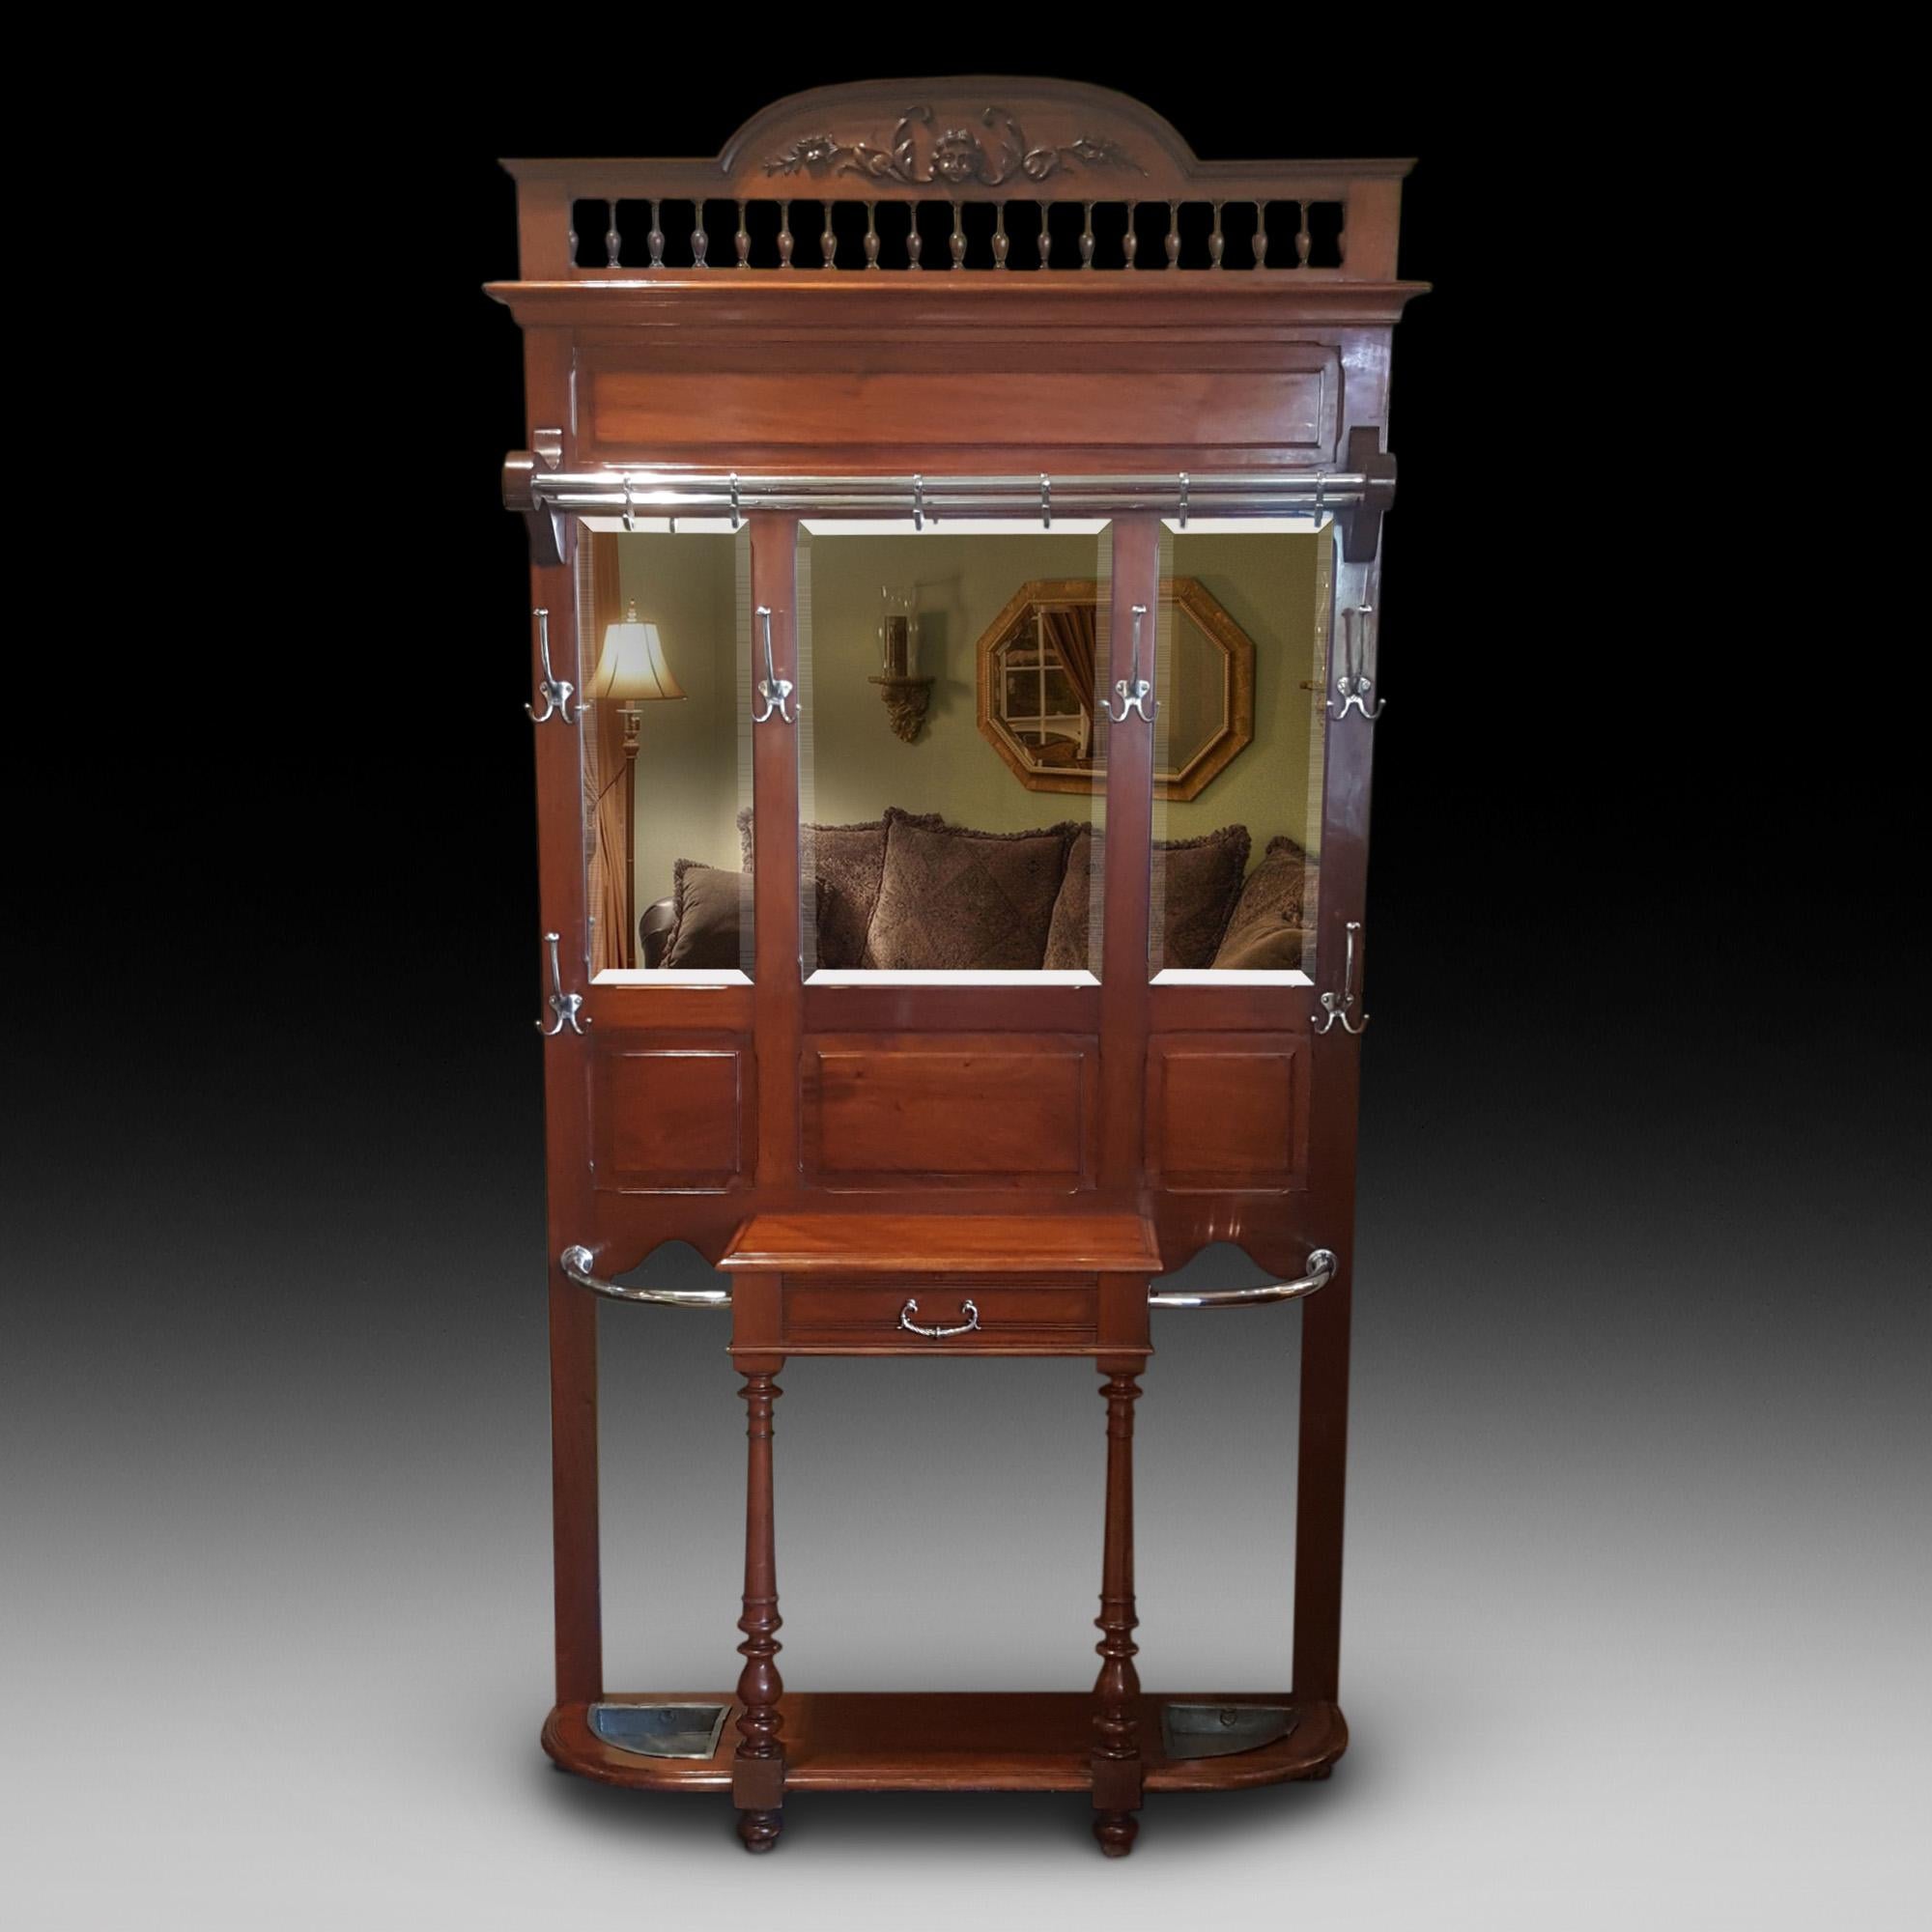 Victorian mahogany hall stand with carved pediment, steel hooks and handle, 3 double beveled mirrors above an oak lined drawer and tin drip trays.
Measures: 48